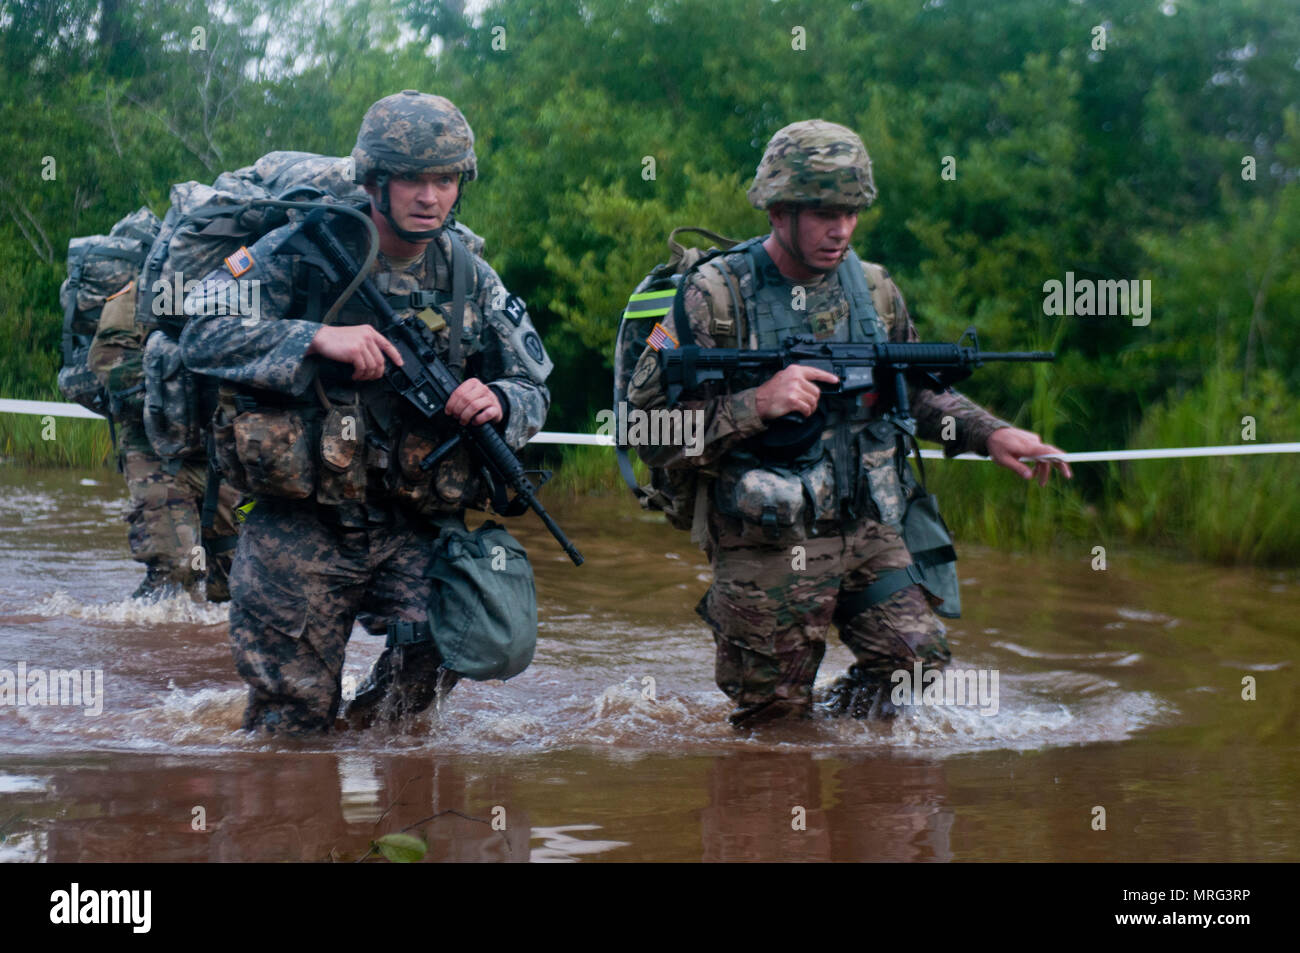 Sgt. Benjamin Morris accompanies another Warrior crossing water during a 10-kelometer foot march at the 2017 U.S. Army Reserve Best Warrior Competition at Fort Bragg; N.C. June 13. This year's Best Warrior Competition will determine the top noncommissioned officer and junior enlisted Soldier who will represent the U.S. Army Reserve in the Department of the Army Best Warrior Competition later this year at Fort A.P. Hill; Va. (U.S. Army Reserve photo by Trenton Fouche) (Released) Stock Photo